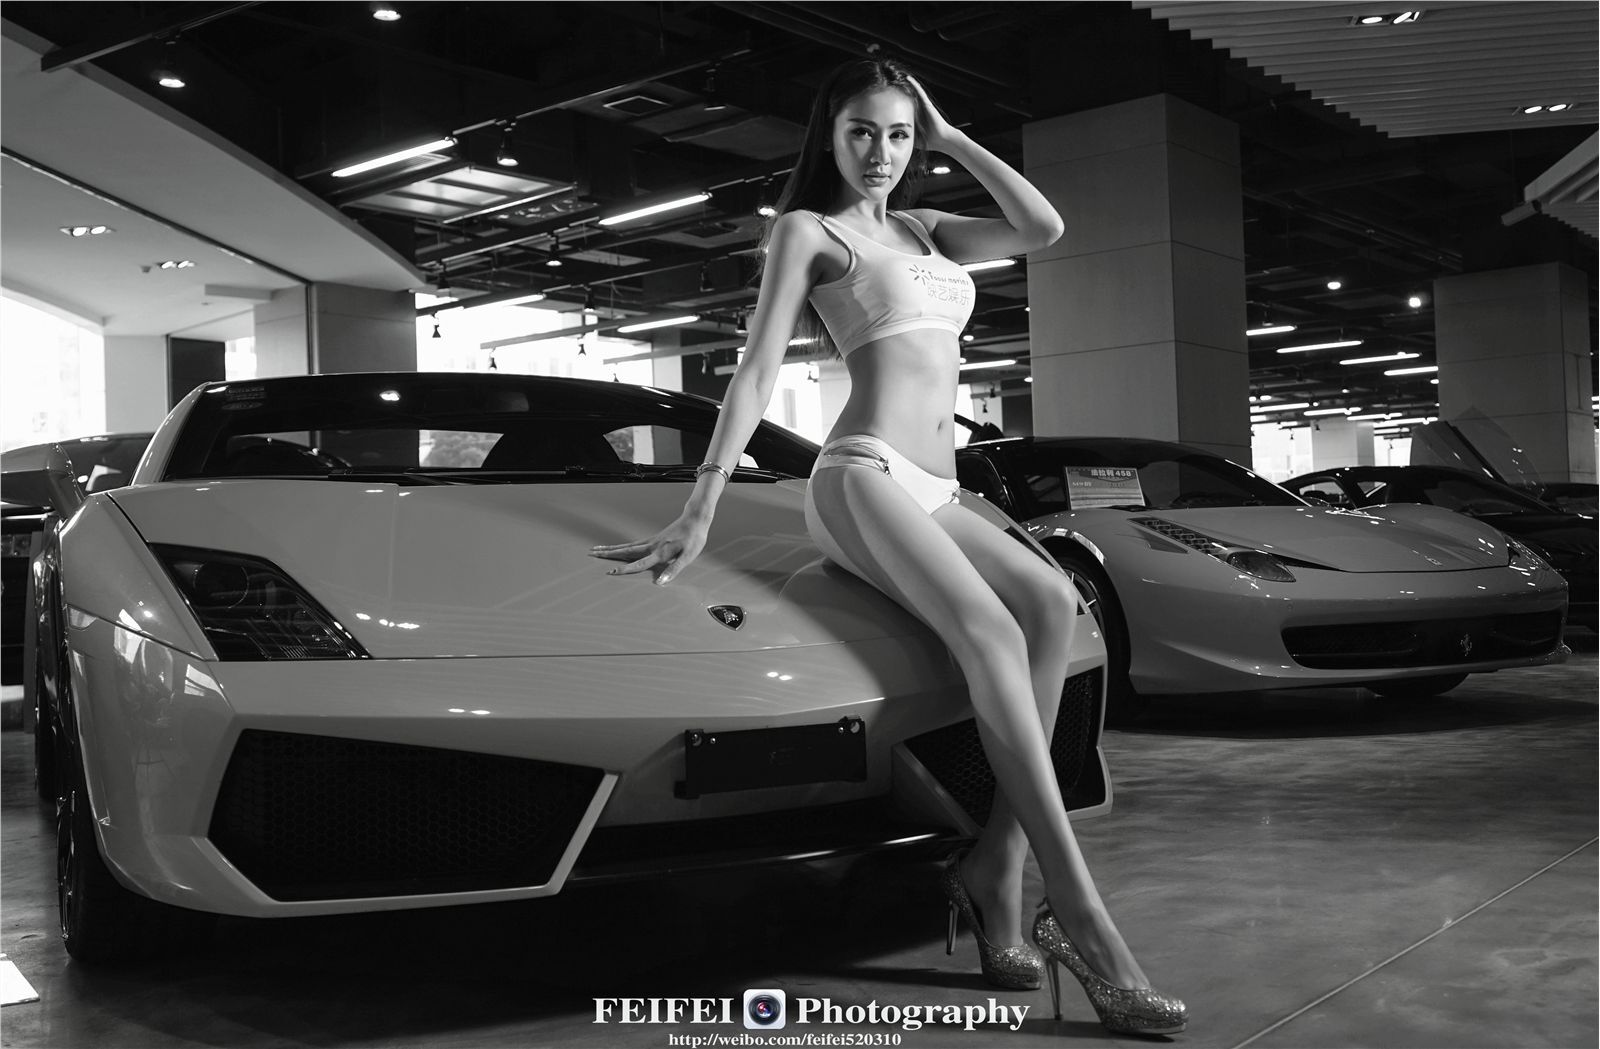 The goddess of sports car